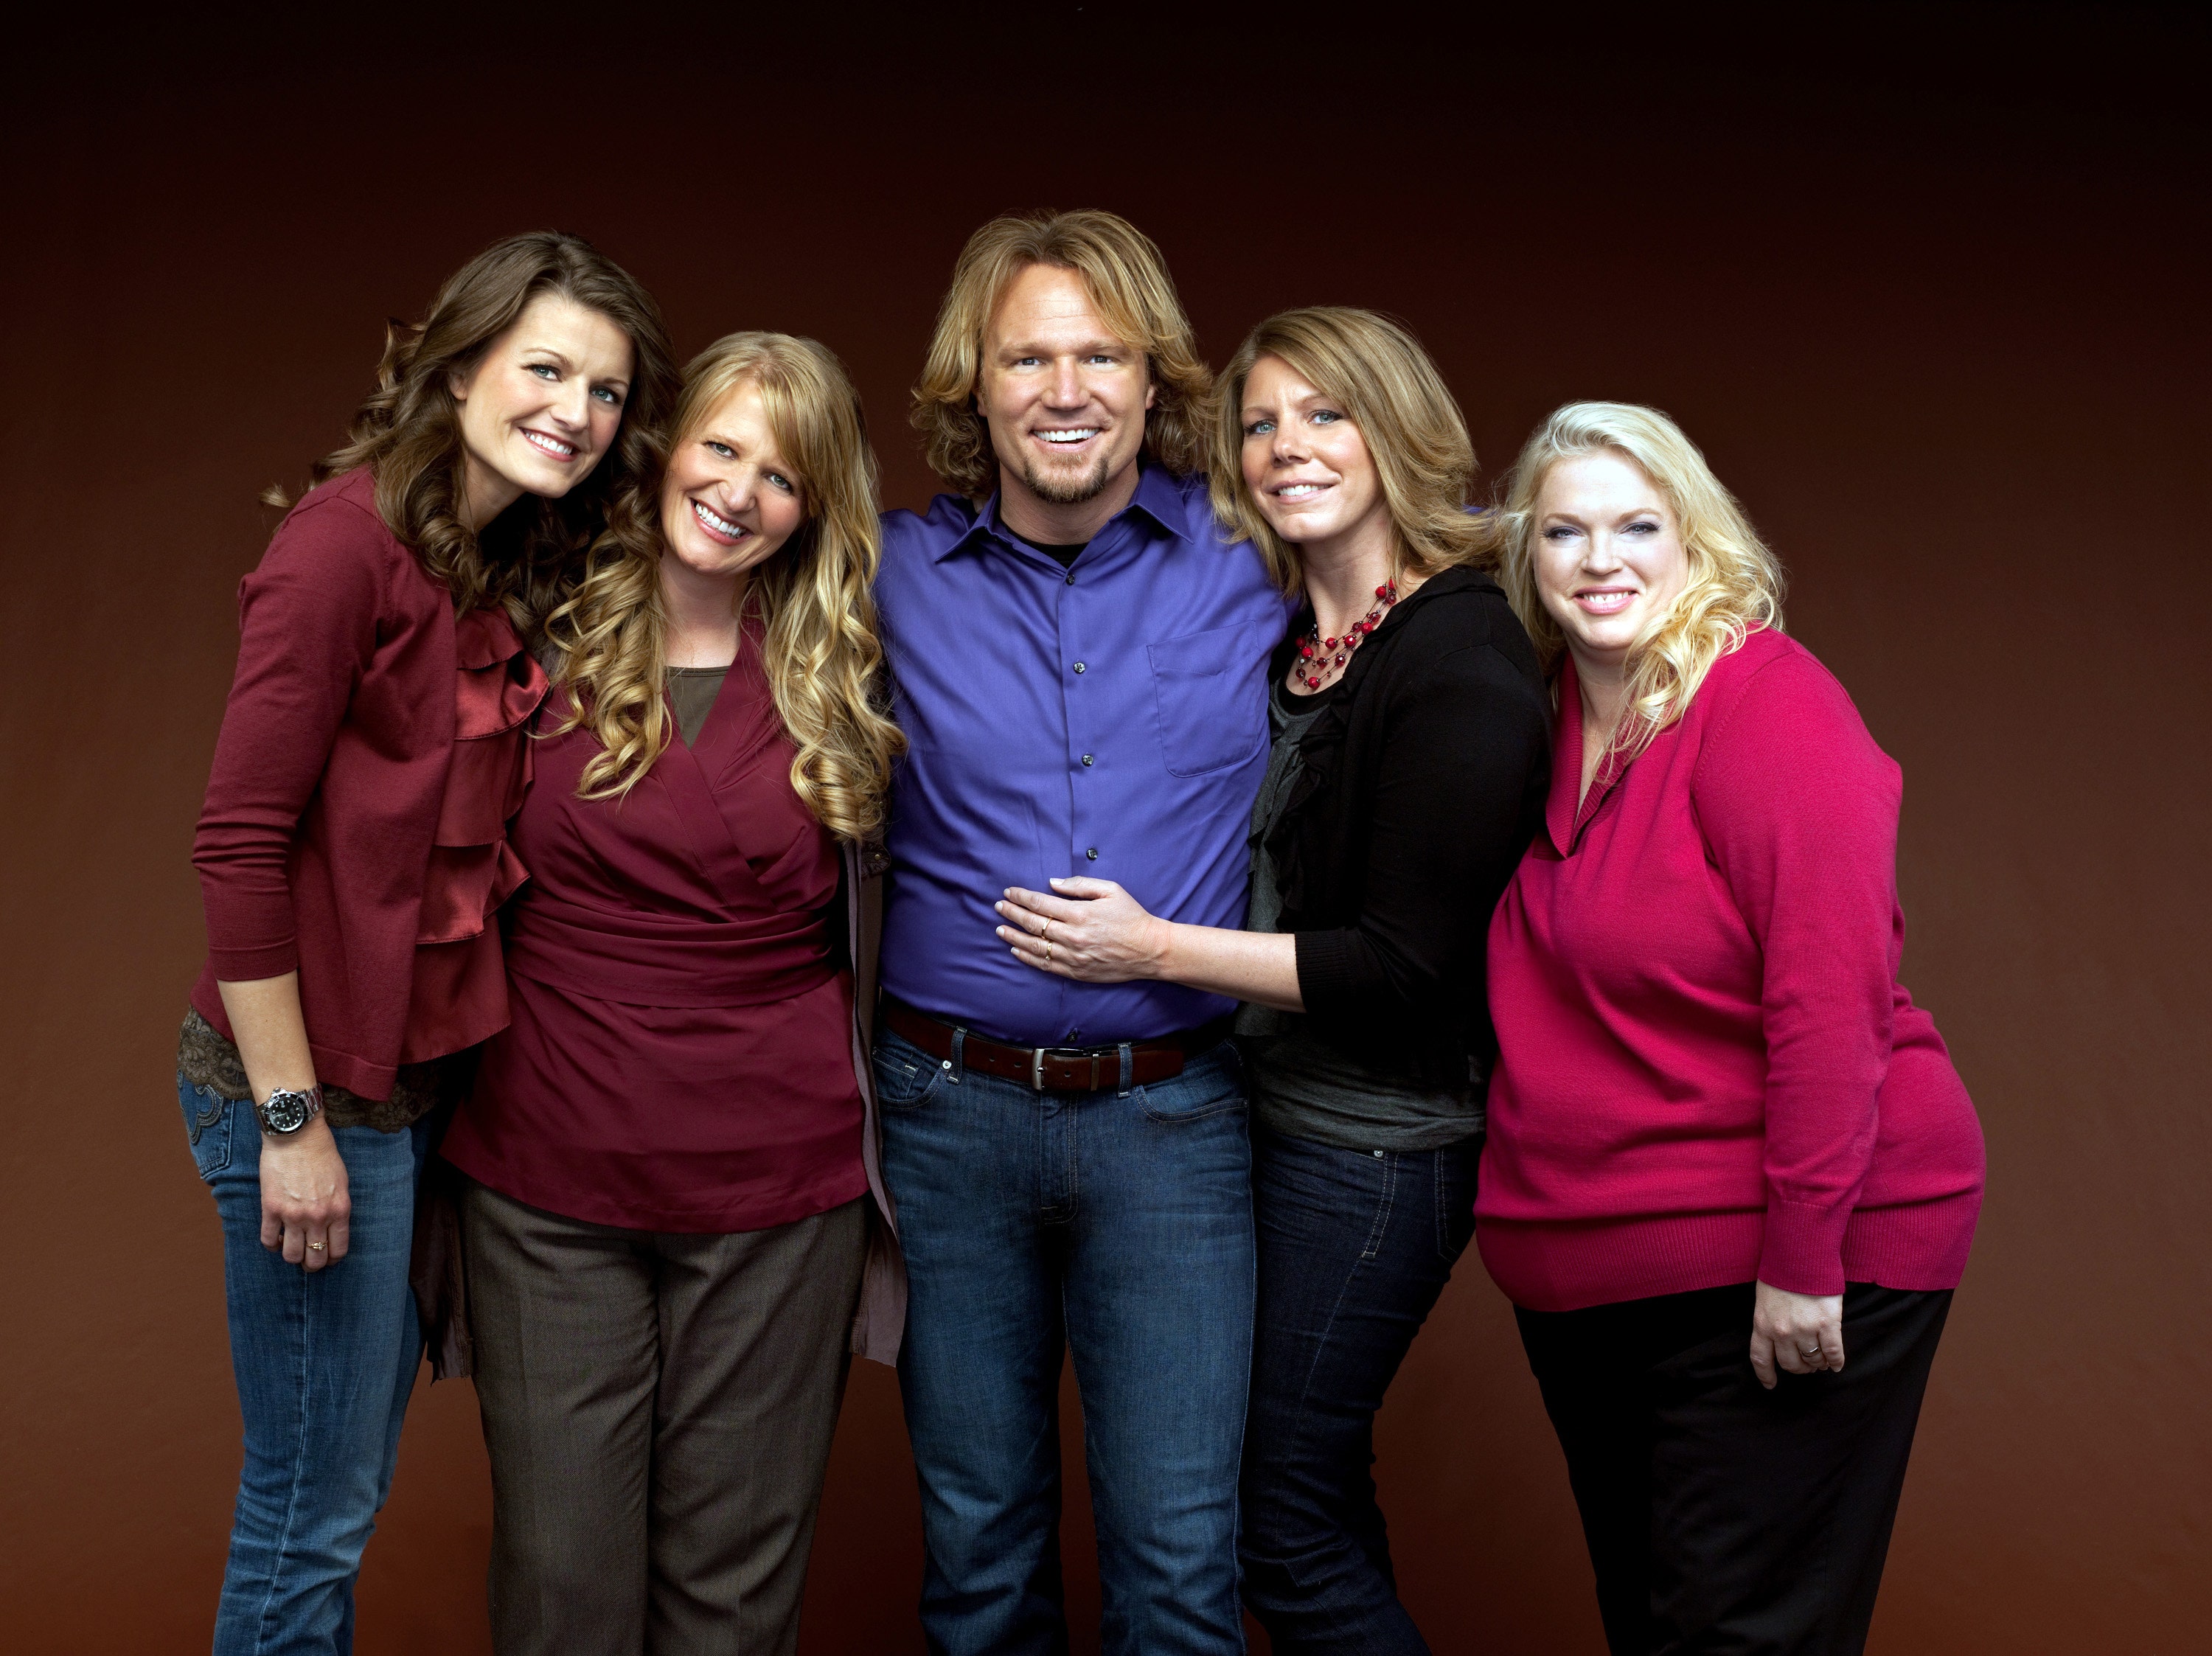 Stars of Sister Wives TV show humbled by ruling striking down Utah ...